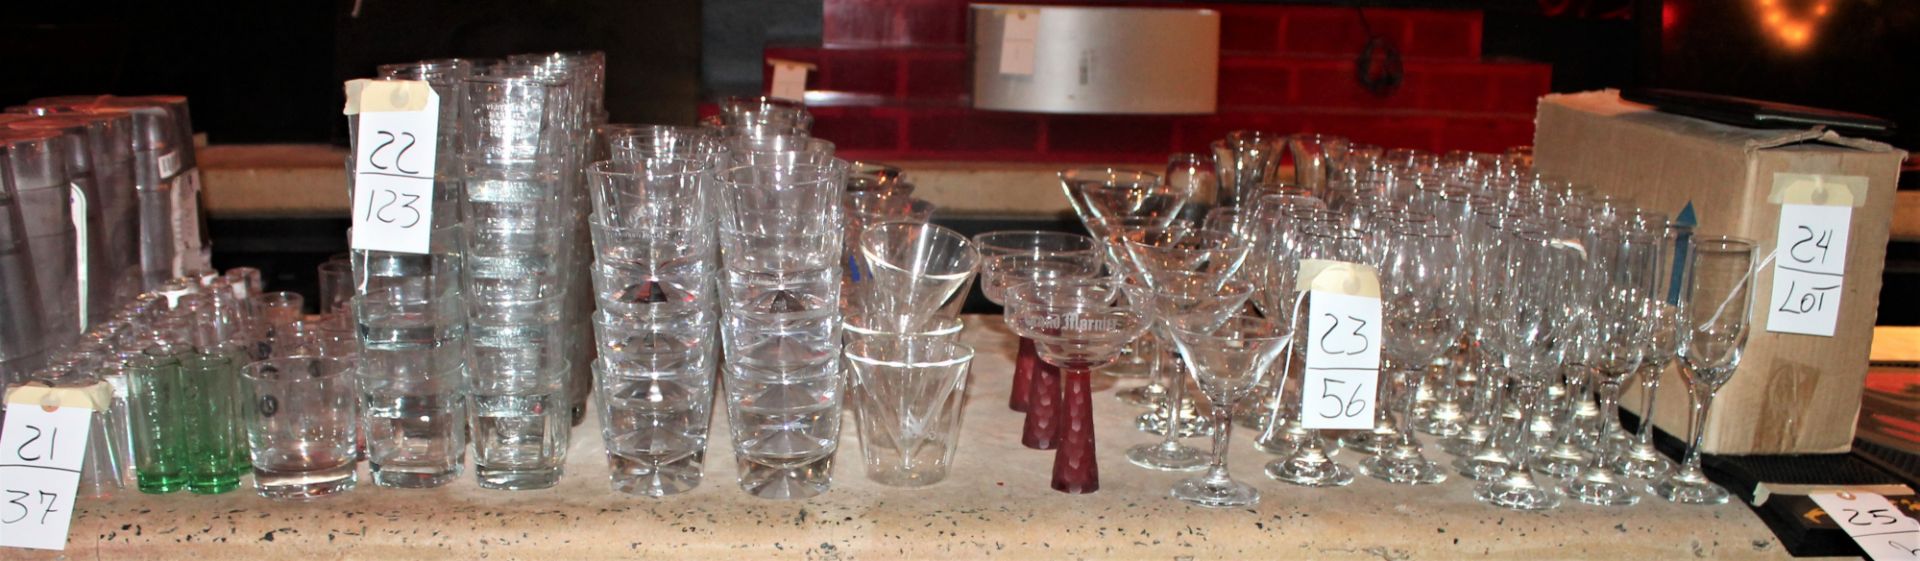 Drink & Water Glasses